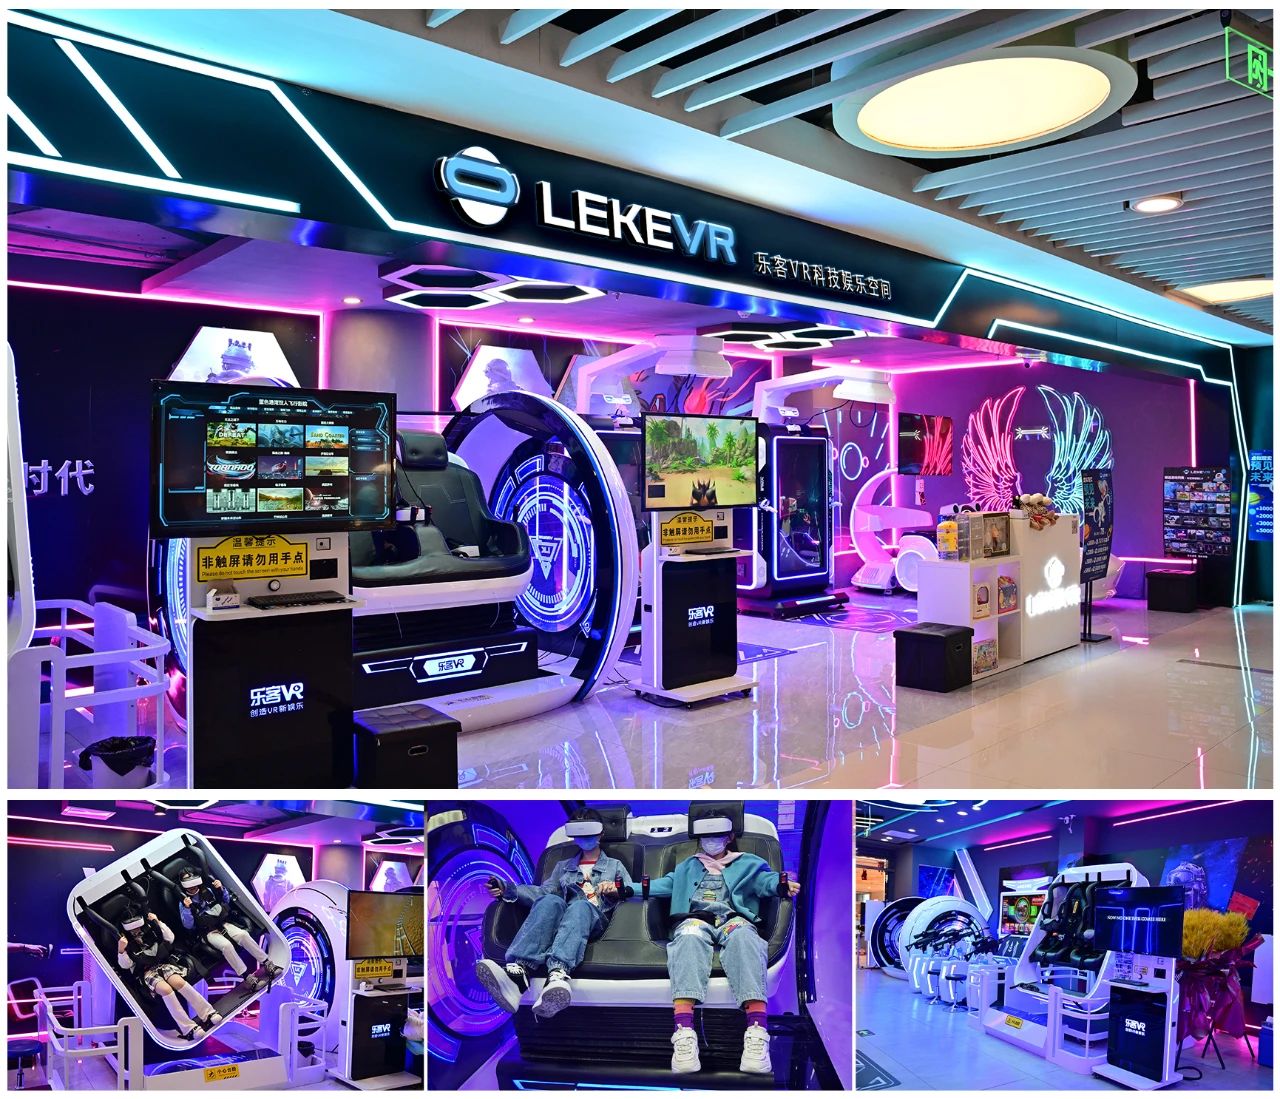 With nearly 100 million yuan in Series B financing, "LEKE VR" will land in more than 1,000 Franchise Stores